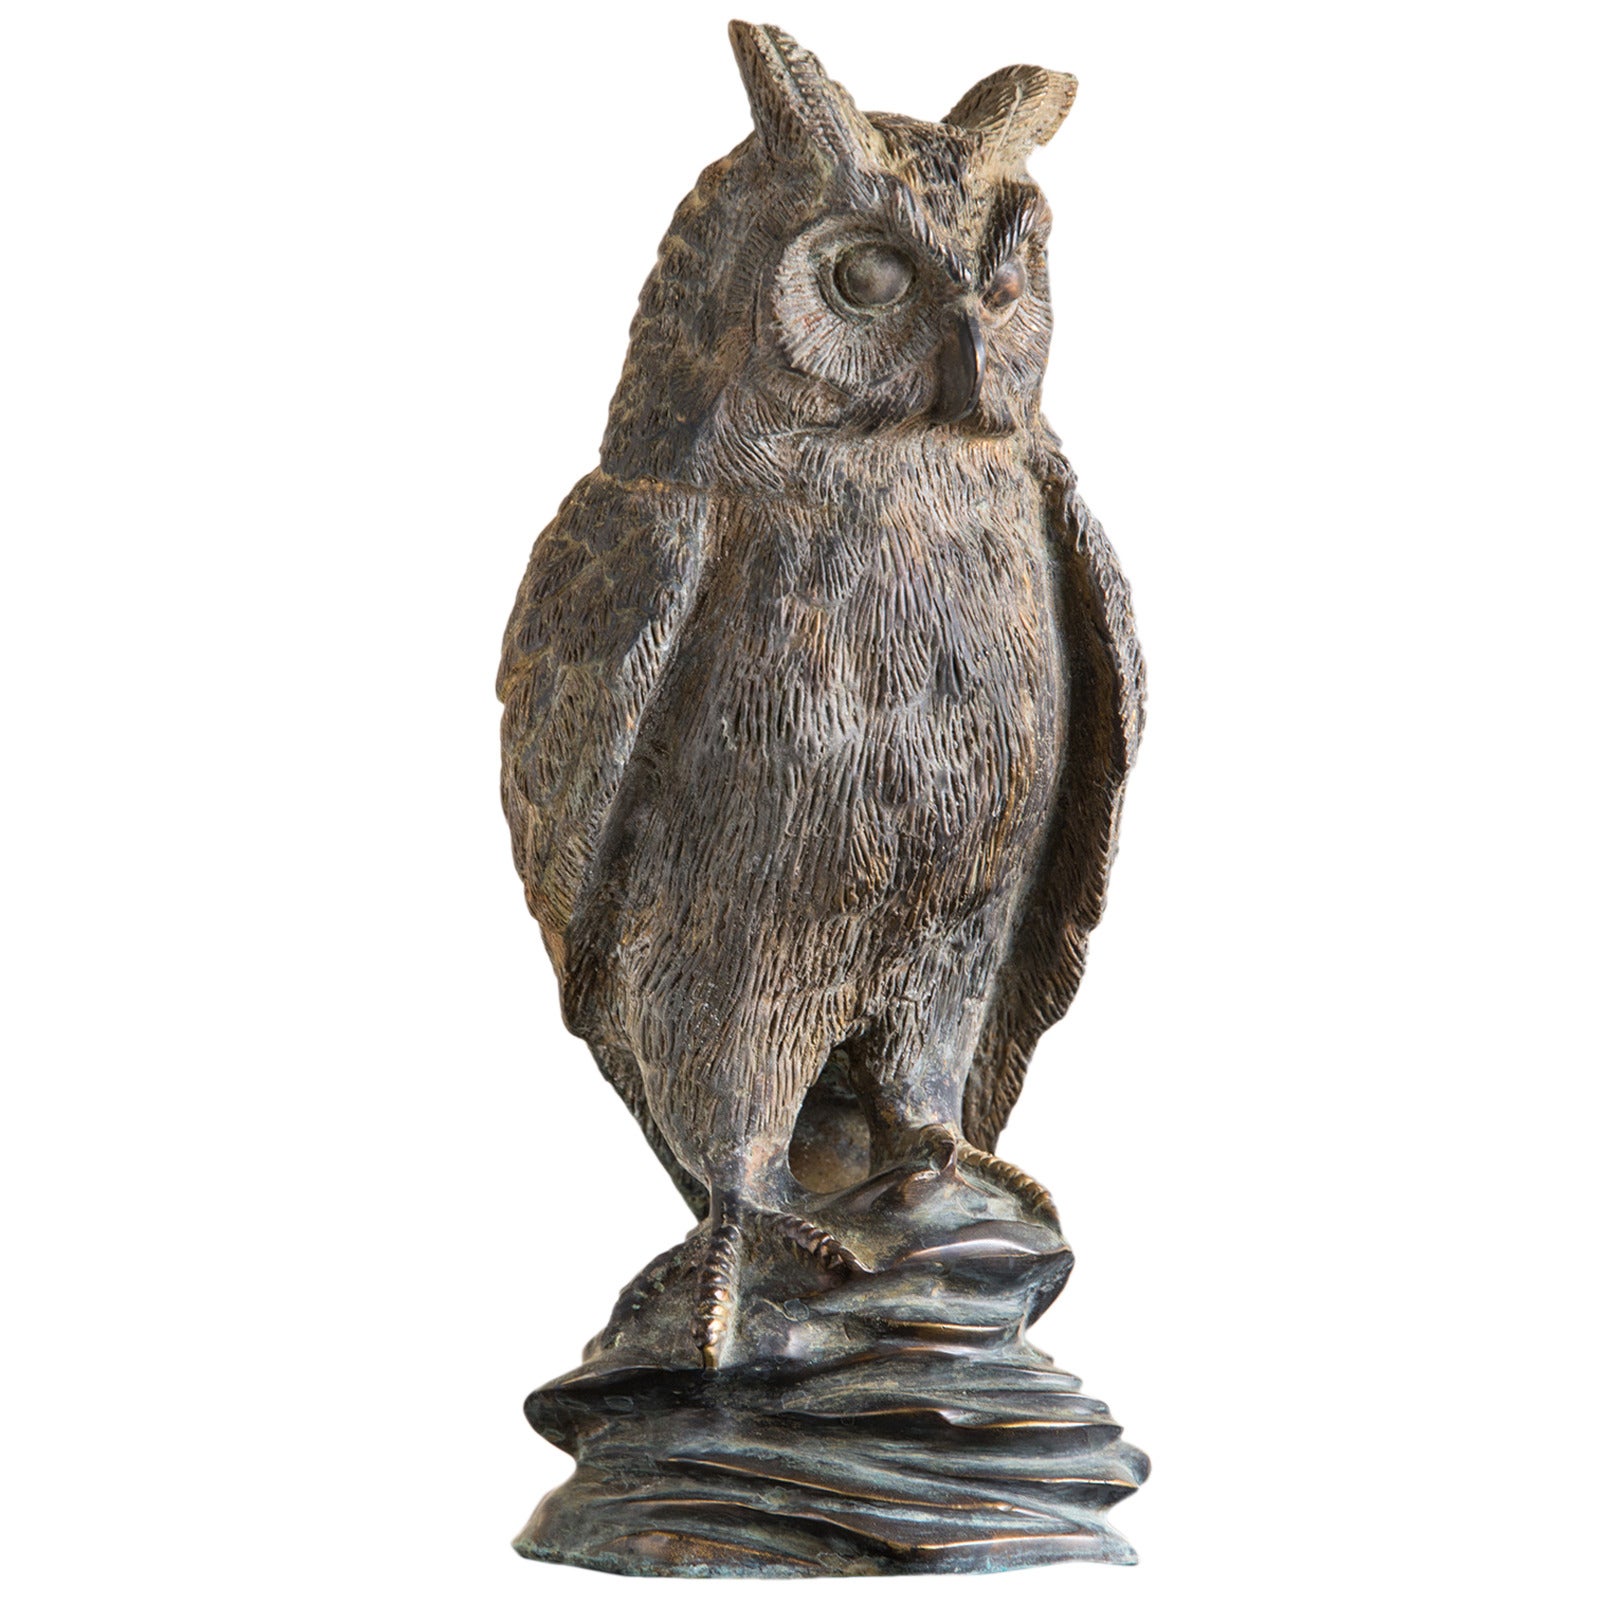 Vintage French Bronze Finished Metal Sculpture of an Owl, circa 1920